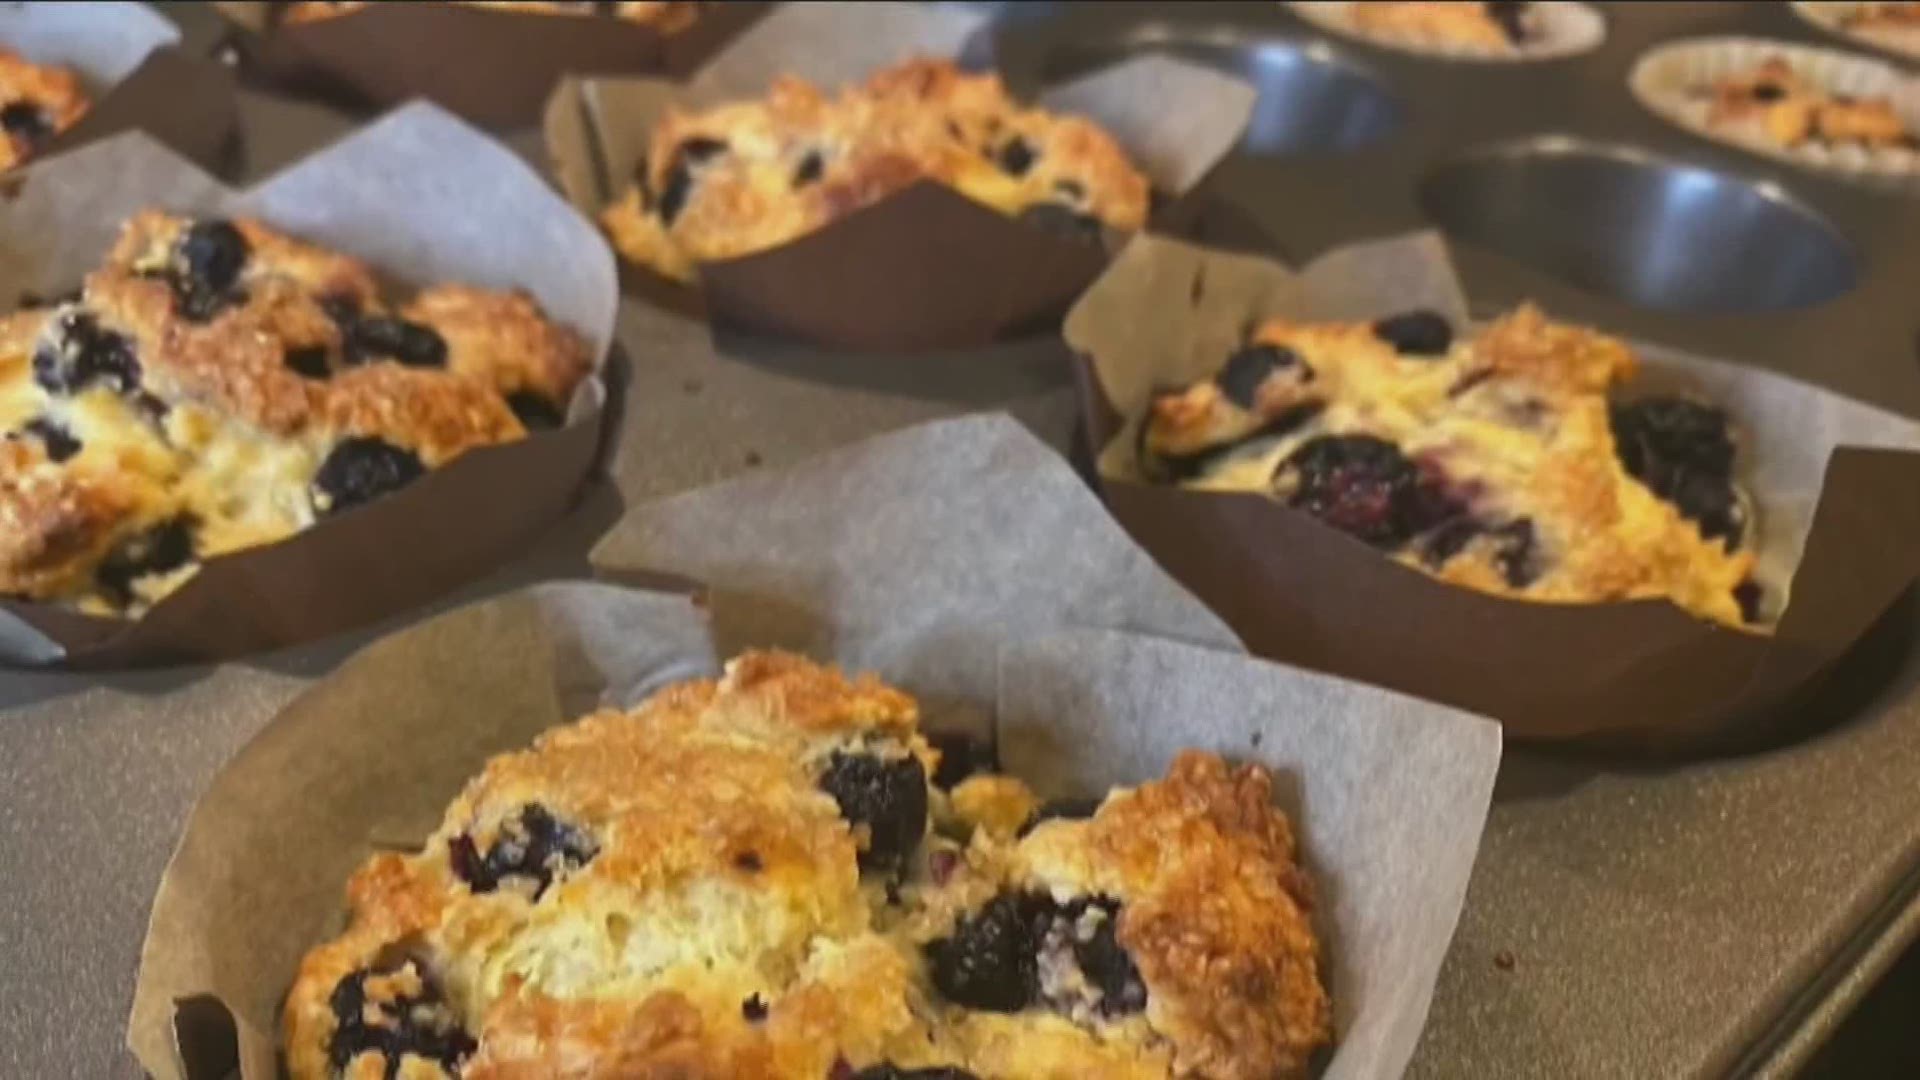 Chef Char shares recipe for lemon blueberry muffins